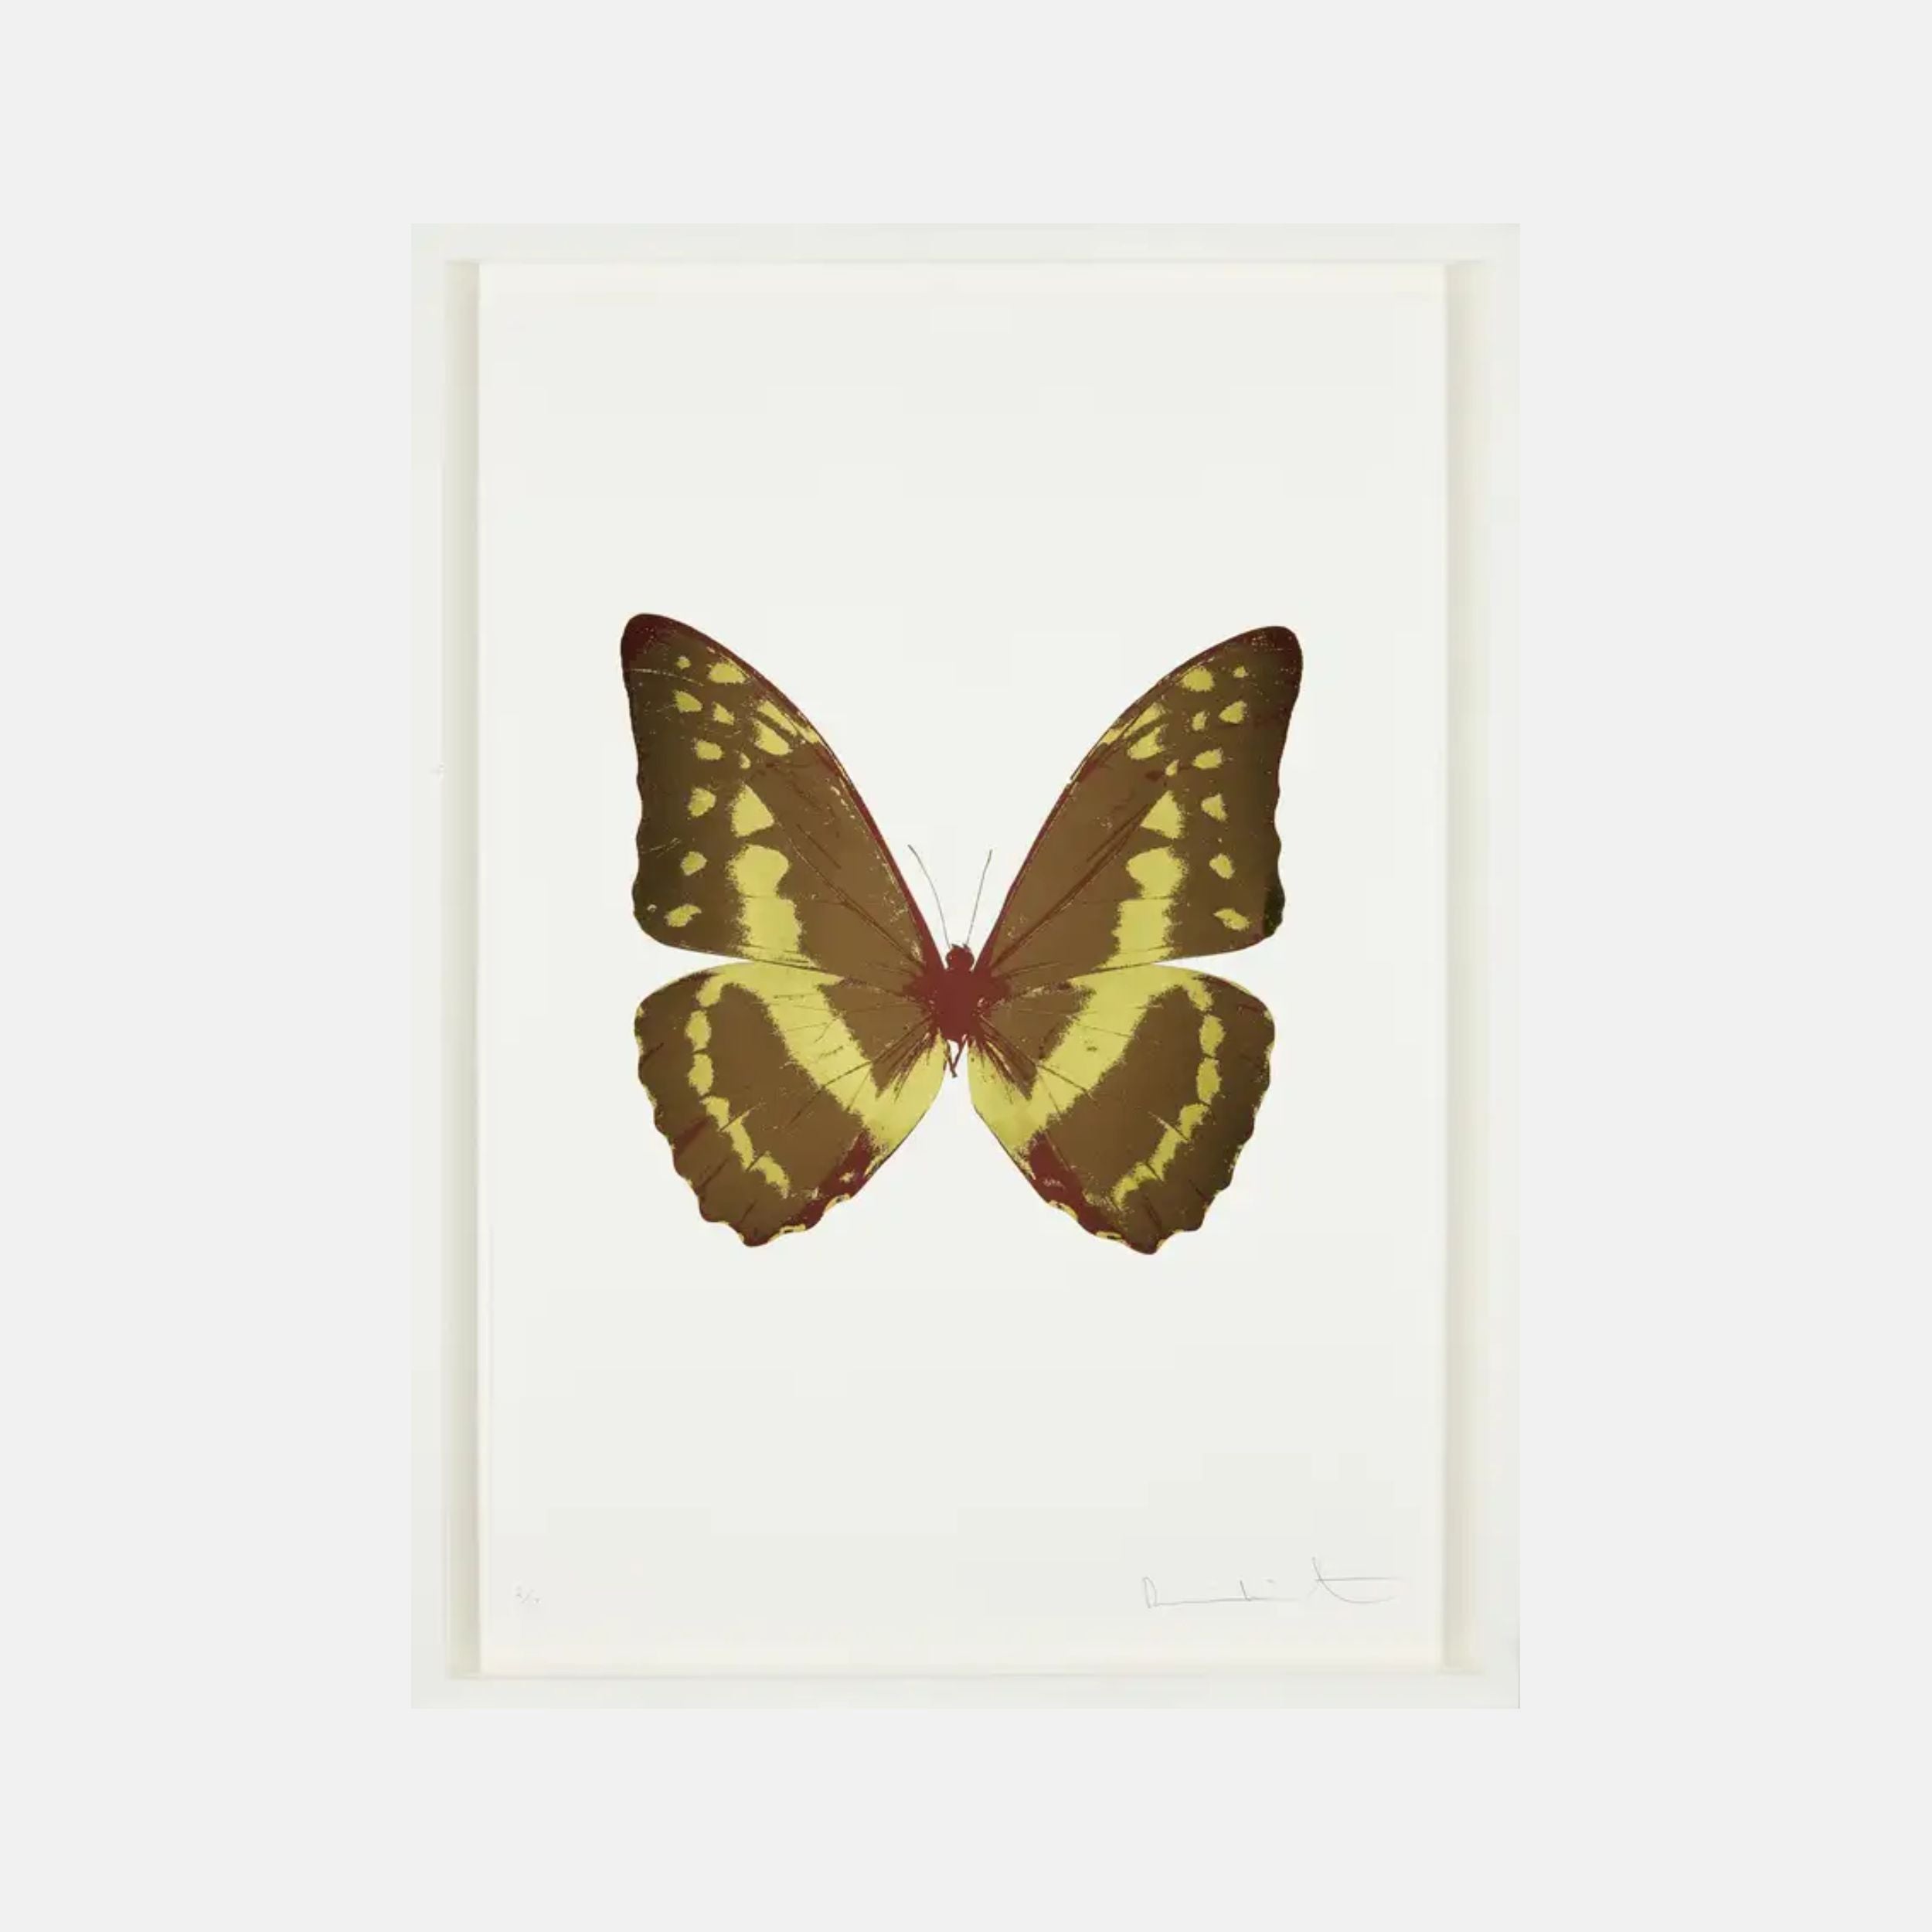 Damien Hirst, The Souls III - Chocolate/Oriental Gold/Burgundy, 2010 For Sale | Lougher Contemporary 